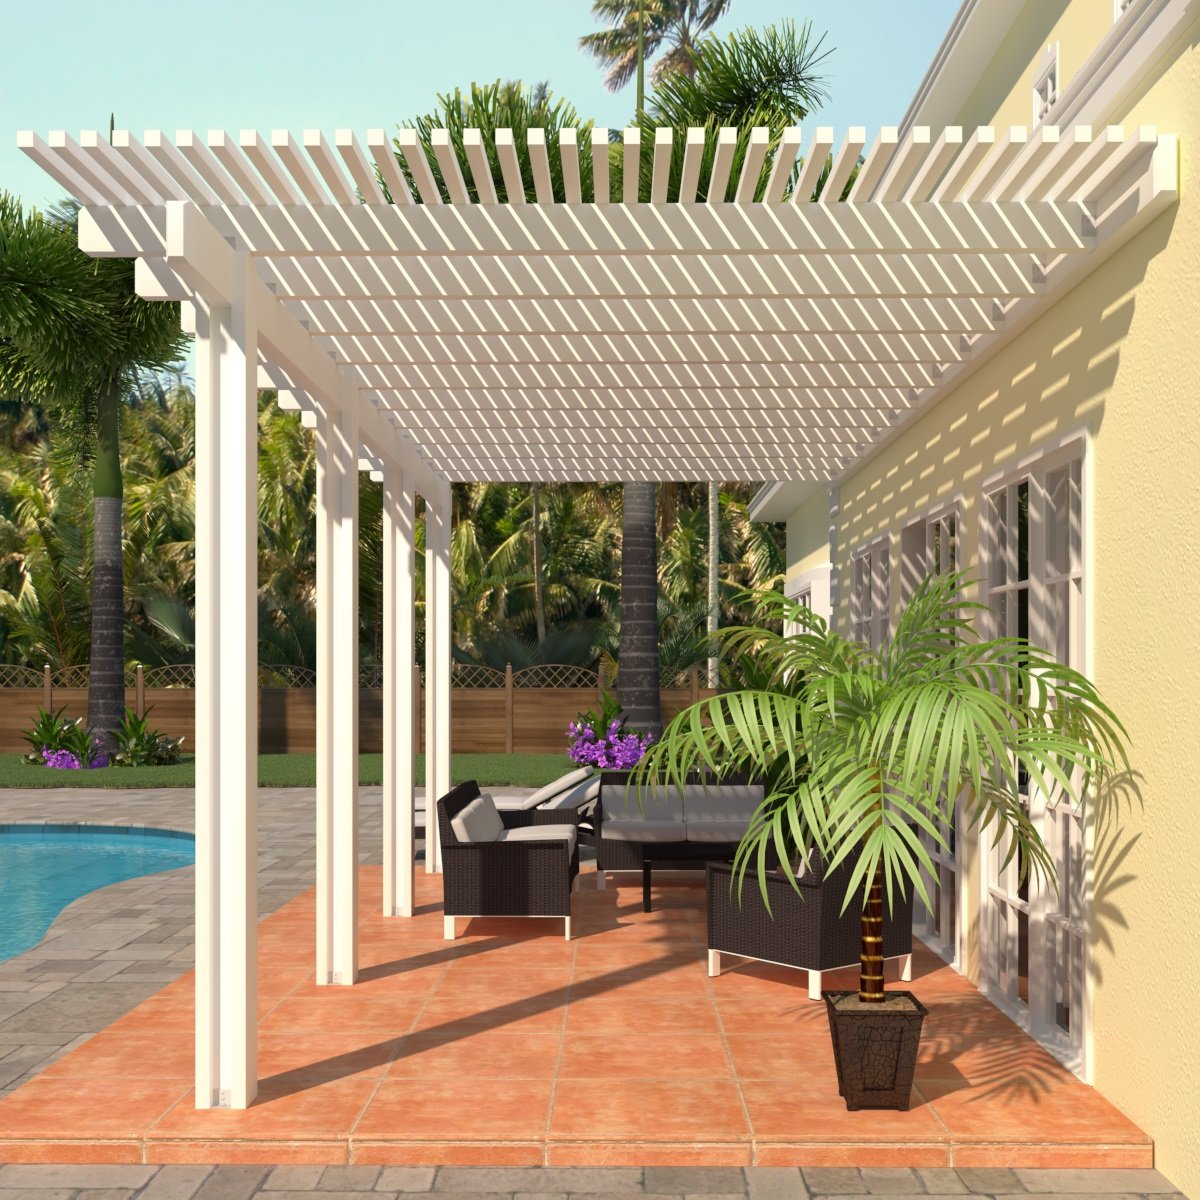 10 ft. Deep x 14 ft. Wide White Attached Aluminum Pergola -4 Posts